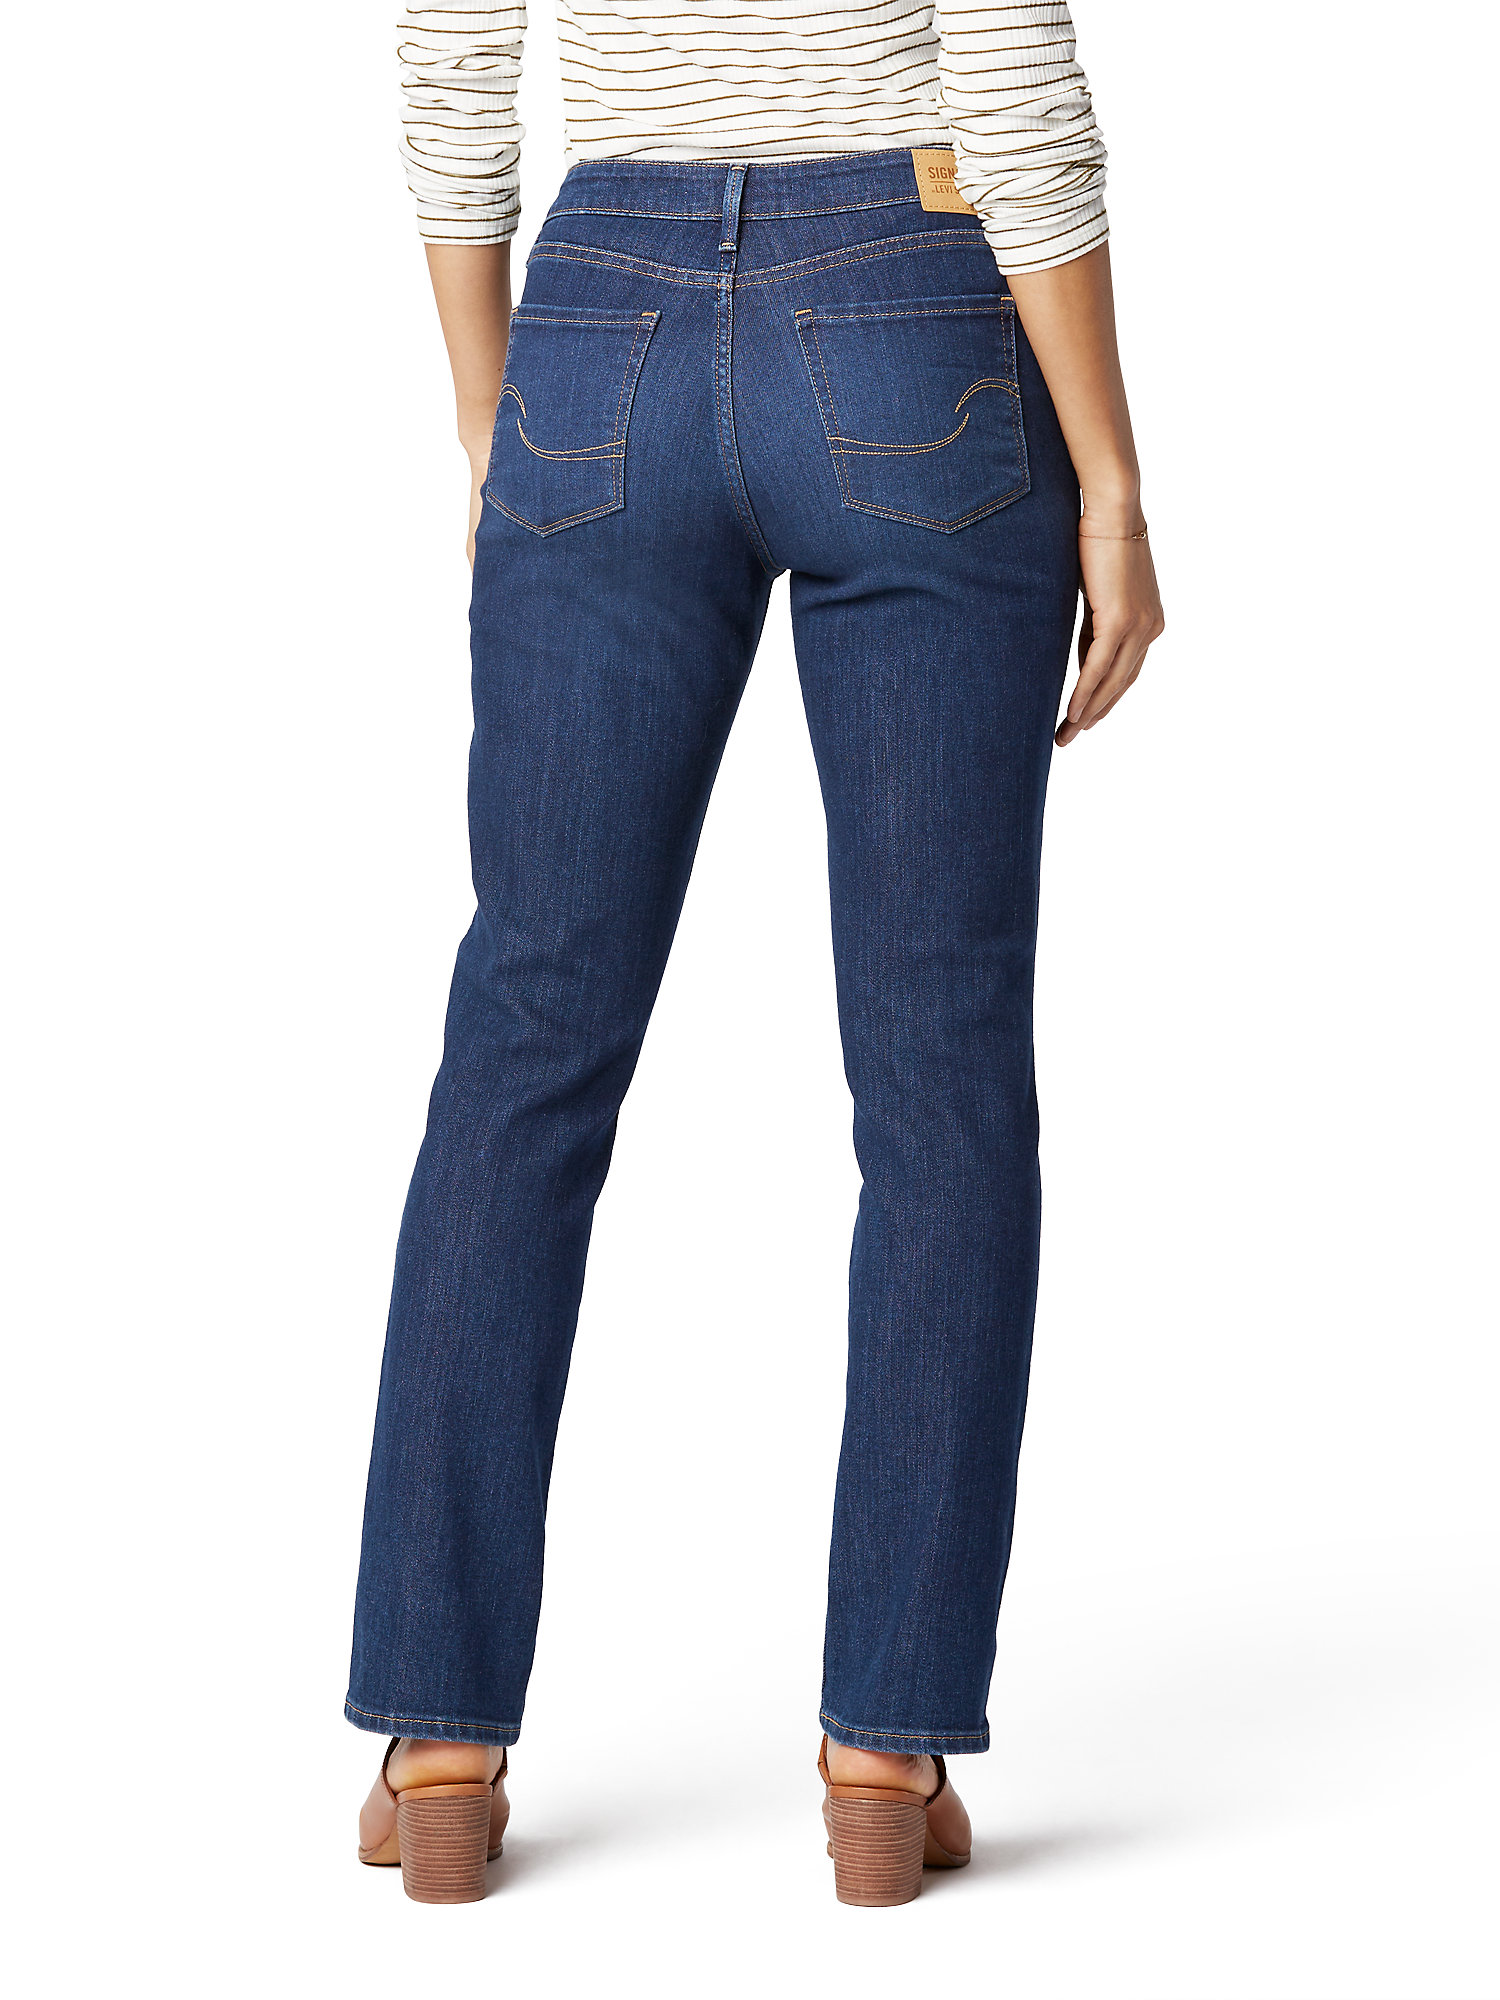 Signature by Levi Strauss & Co. Women's and Women's Plus Size Mid Rise Modern Straight Jeans, Sizes 2-28 - image 2 of 3